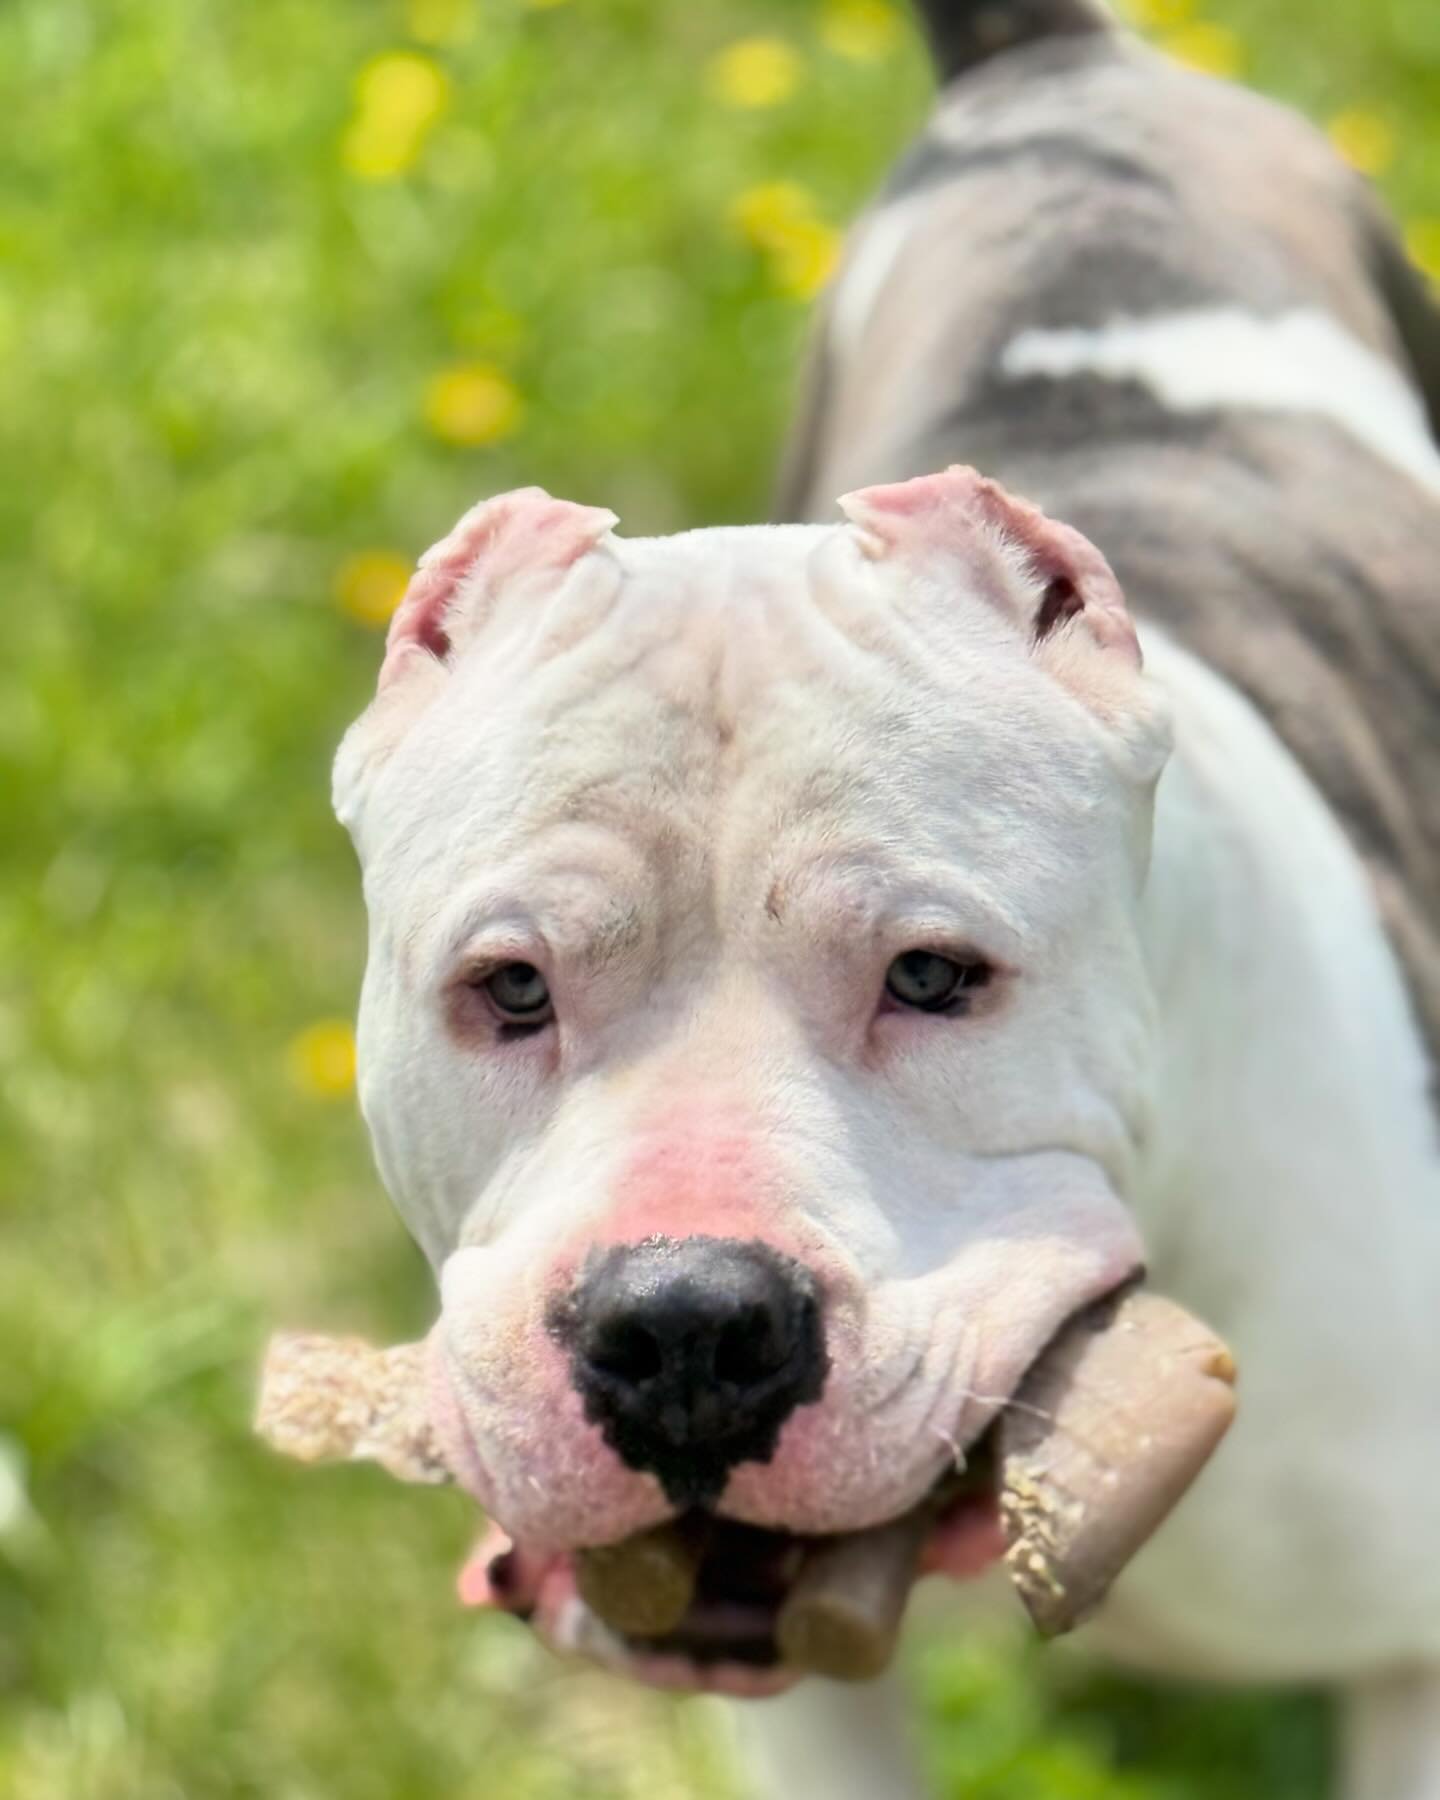 Glamour shot ✨featuring Adoptable Arlo and his Benebone 😍

This handsome fella is the total package; housebroken, walks perfectly on leash, and is the sweetest boy who loves to snuggle 🥰

Click the &ldquo;Current Adoptables&rdquo; link in our bio t